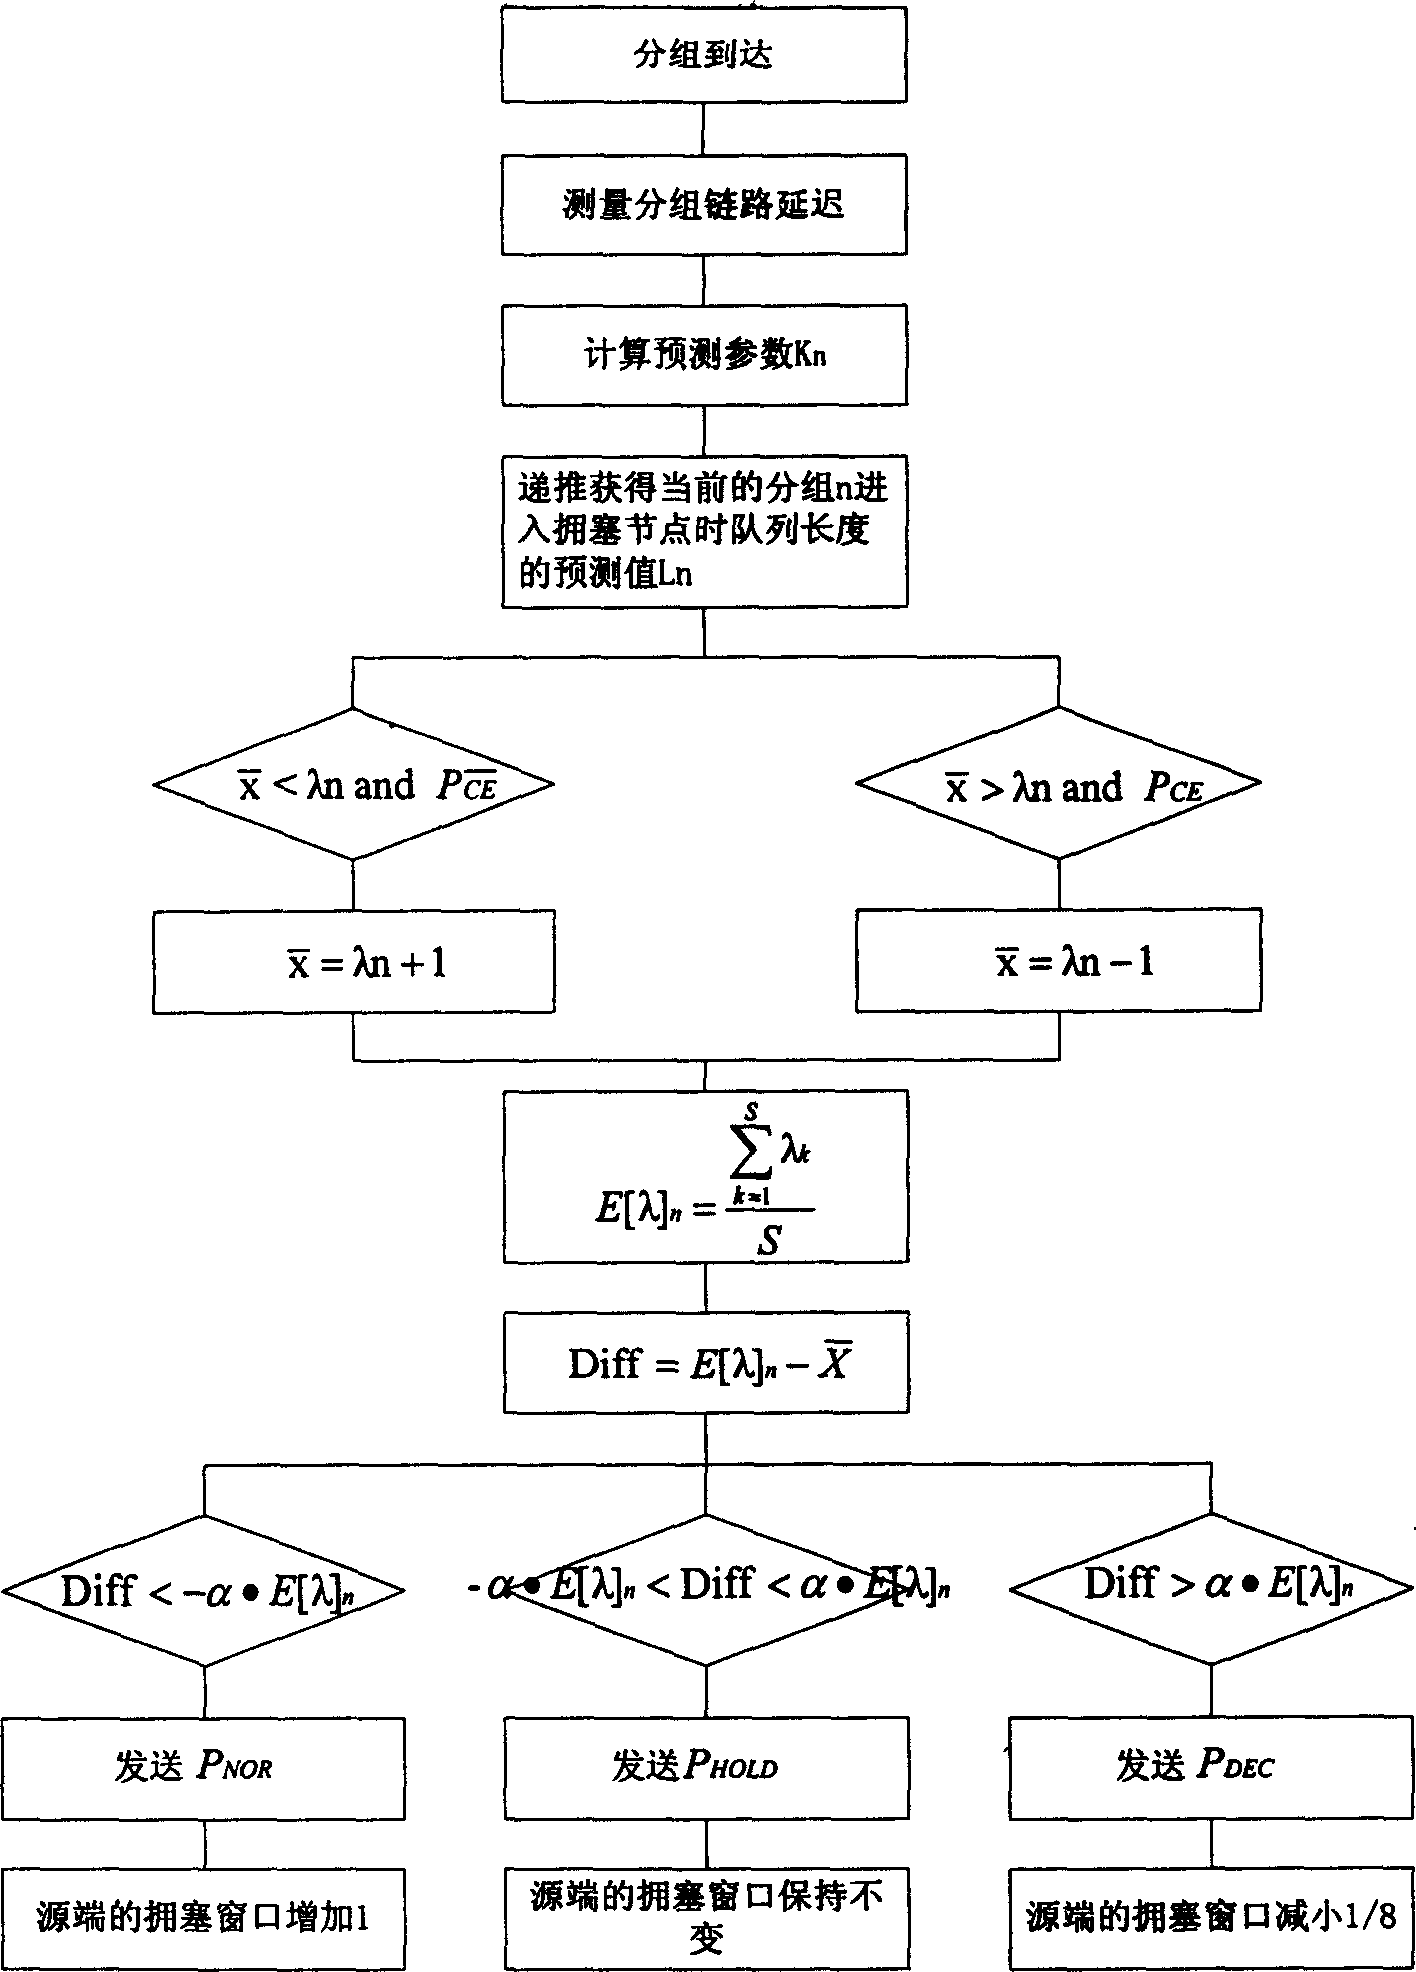 ECN based congestion control method with prediction verification